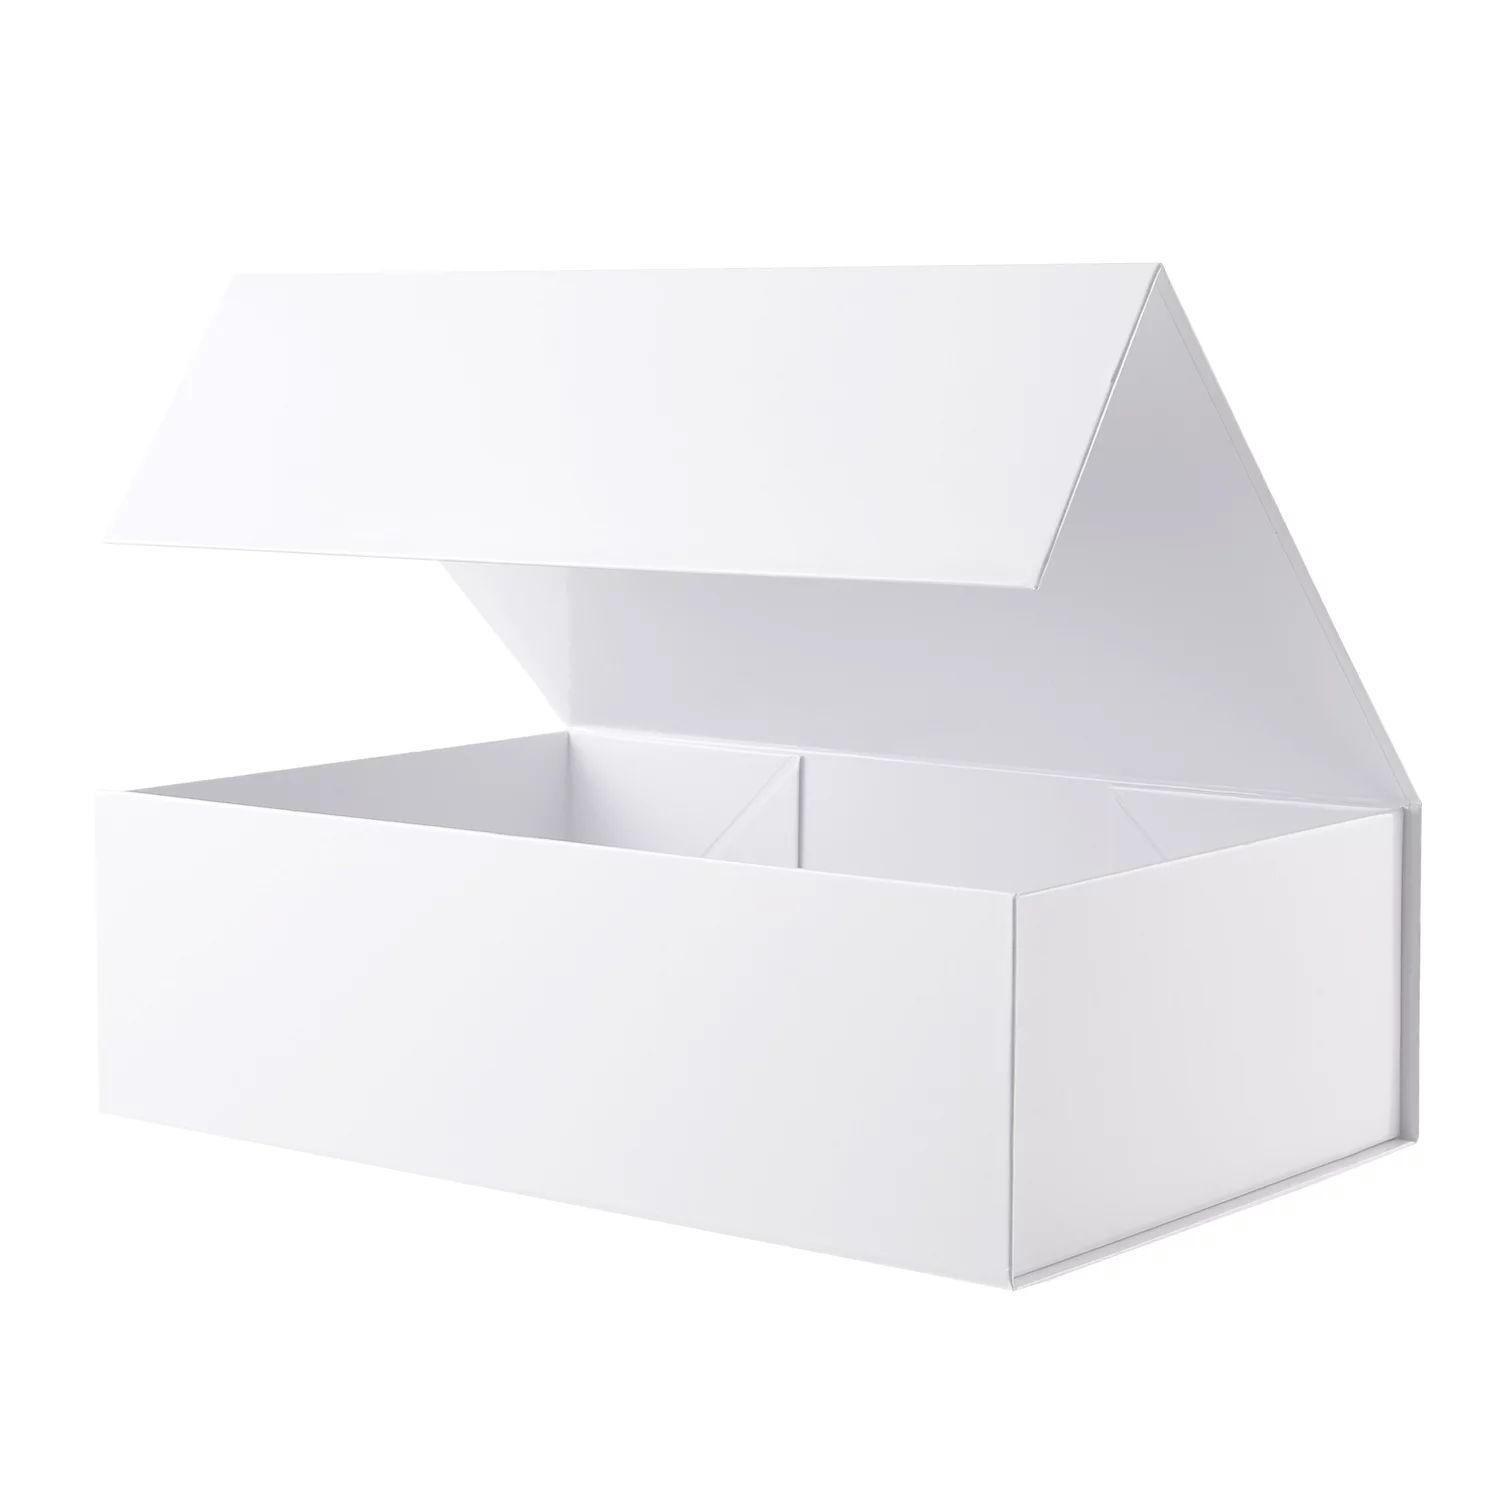 PKGSMART Gift Box, Large White Magnetic Gift Box with Lid for Wedding, Party, 13.5x9x4.1 inches | Walmart (US)